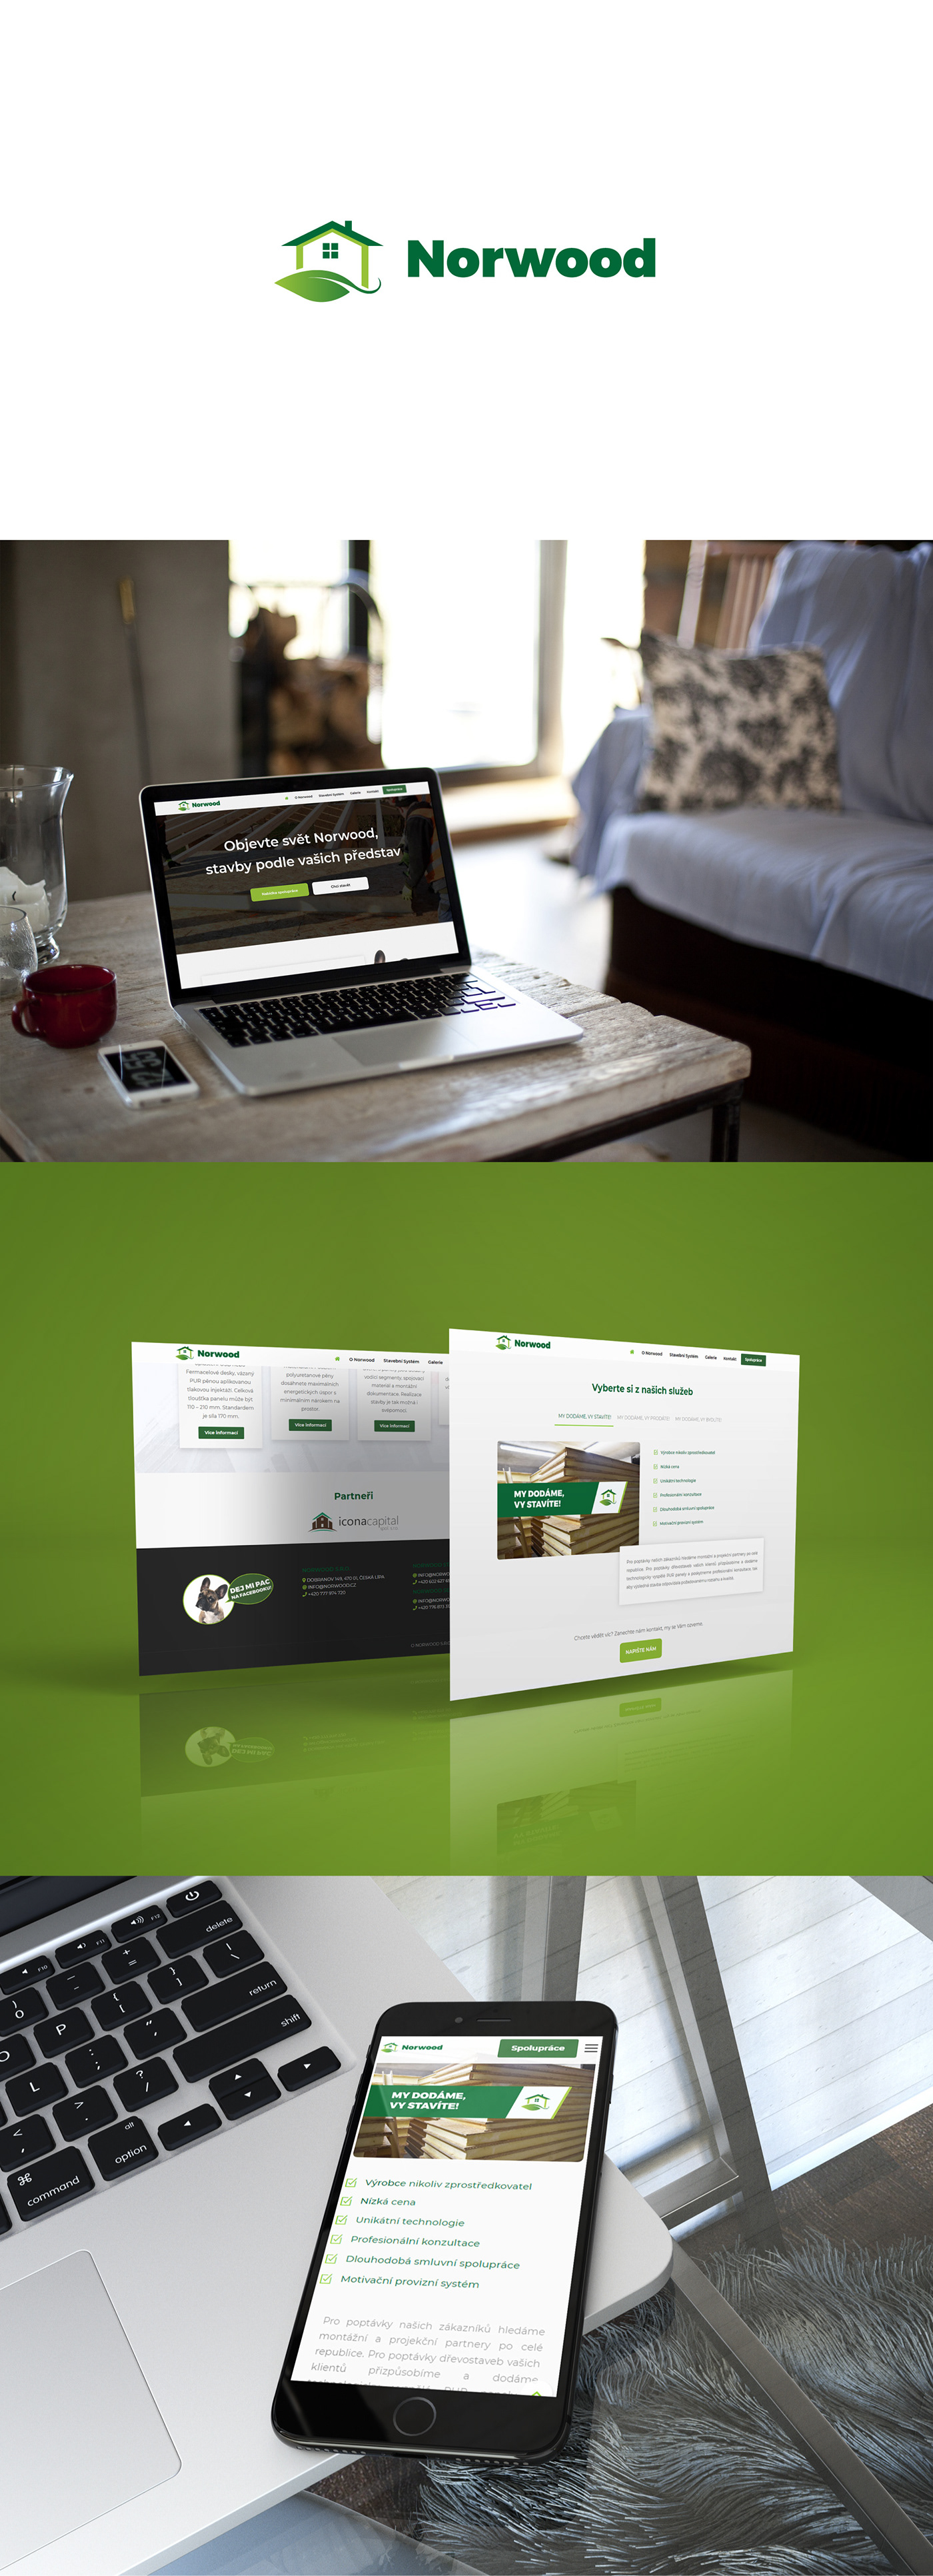 wood PUR panels houses producer company Website Webdesign Responsive green